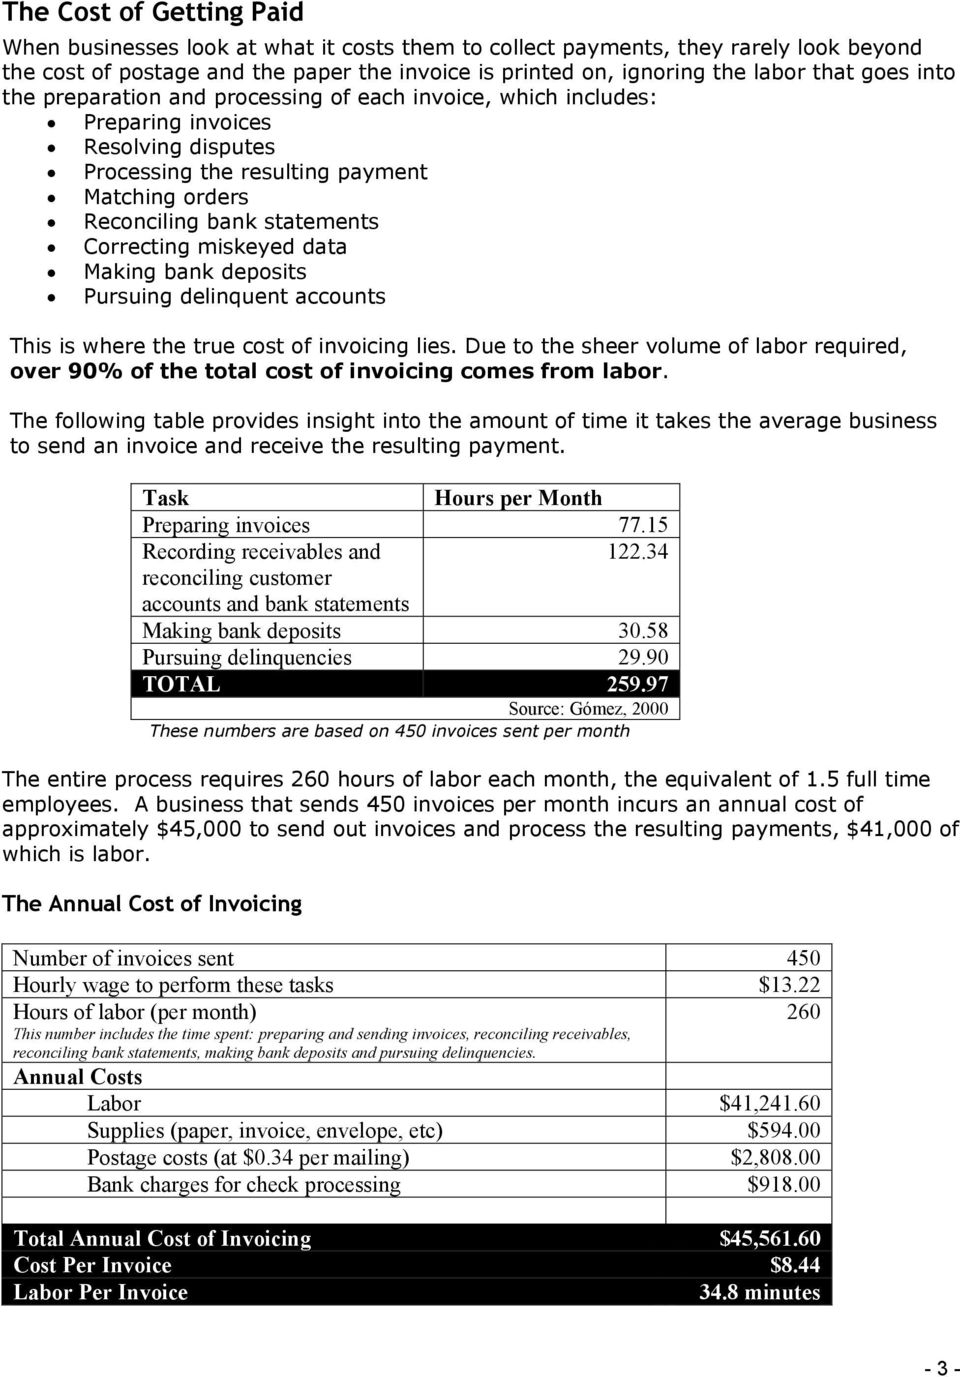 the true costs of invoicing and payment pdf free download the average cost of a paper invoice